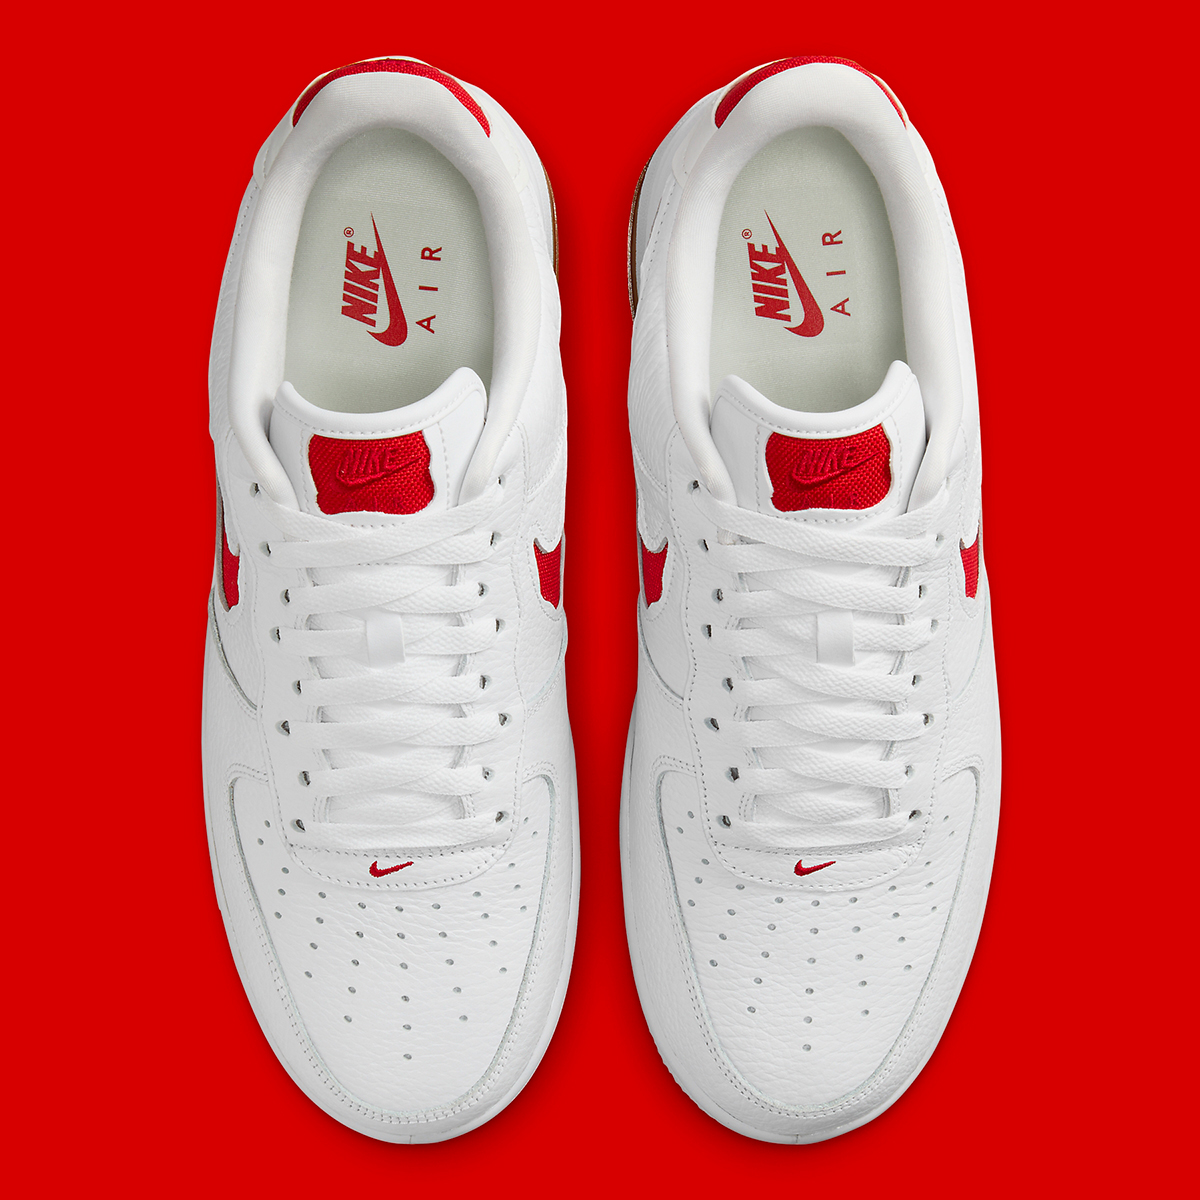 Nike Air Force 1 Low Evo White University Red Hf3630 100 2